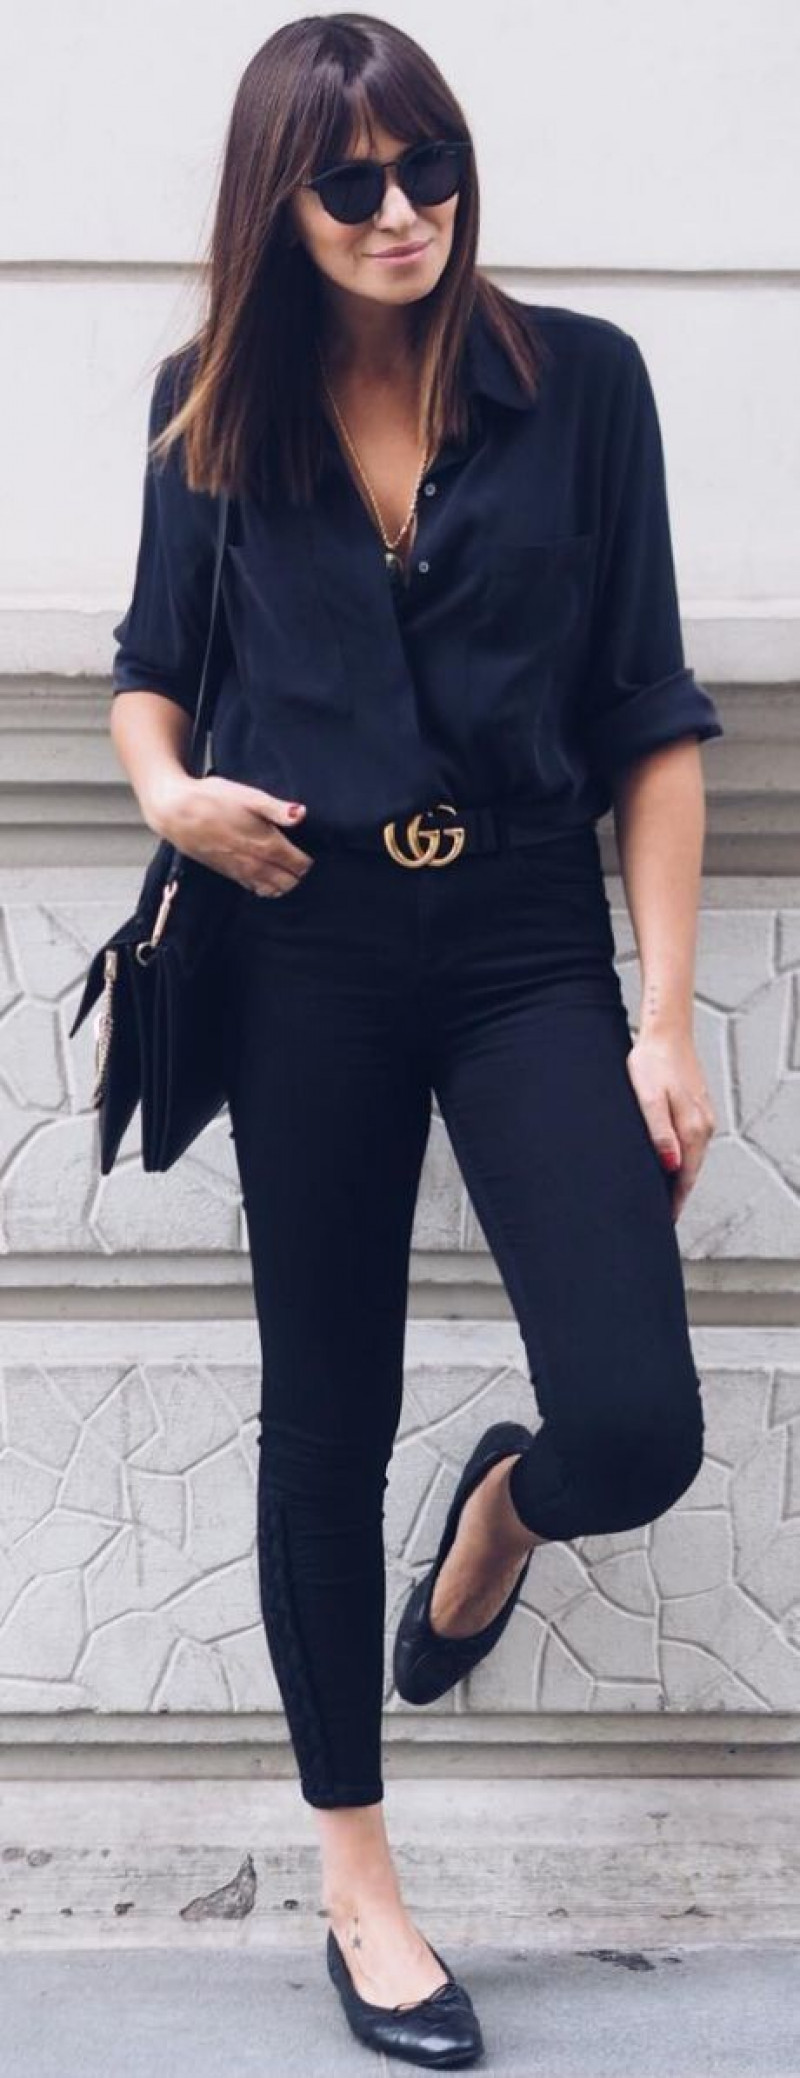 Dark Blue And Navy Cropped Blouse  Fashion Outfits With Black Casual Trouser, Casual Office Wear: formal wear,  smart casual,  business casual  